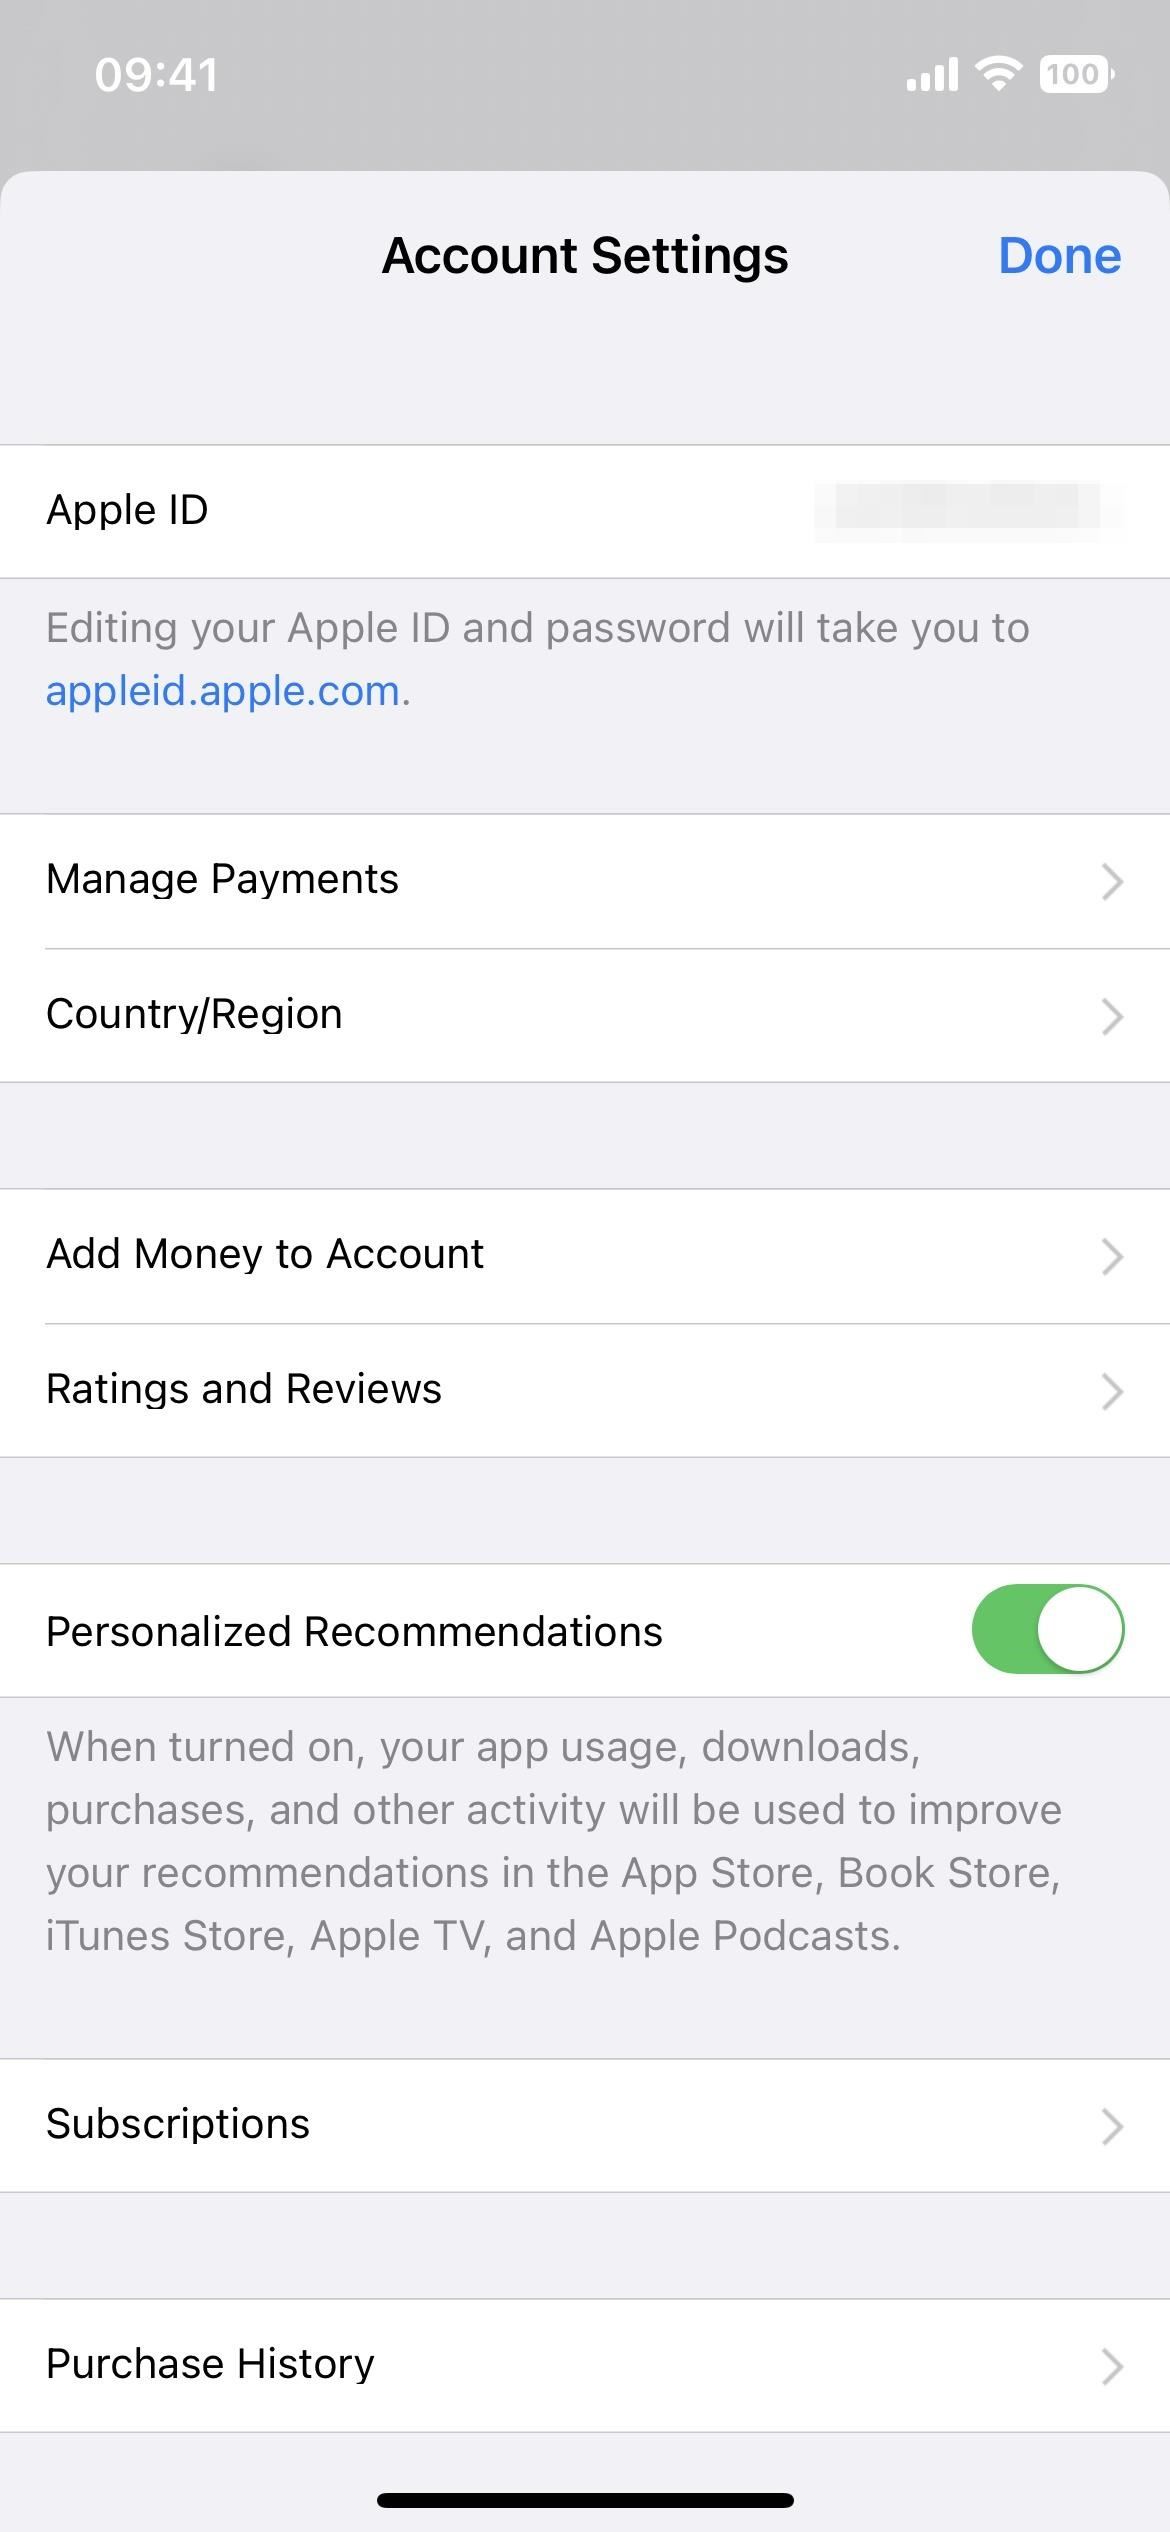 6 Hidden Apps You Didn't Know Existed on Your iPhone